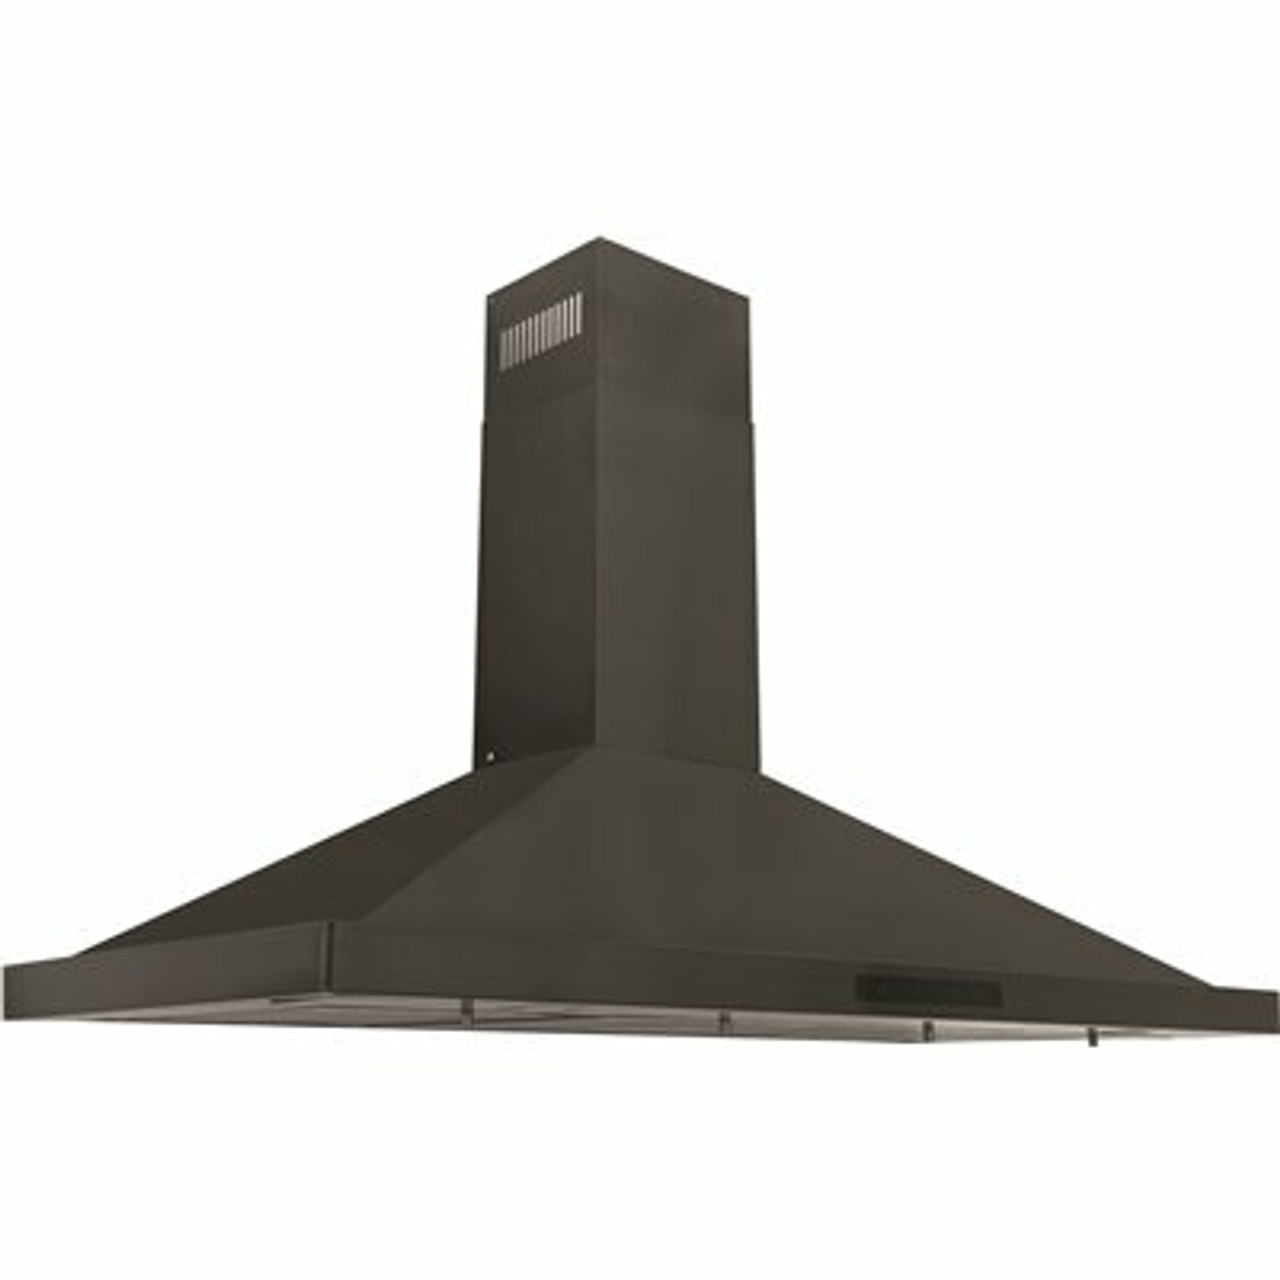 Zline Kitchen And Bath 48 In. Convertible Vent Wall Mount Range Hood In Black Stainless Steel (Bskbn-48)